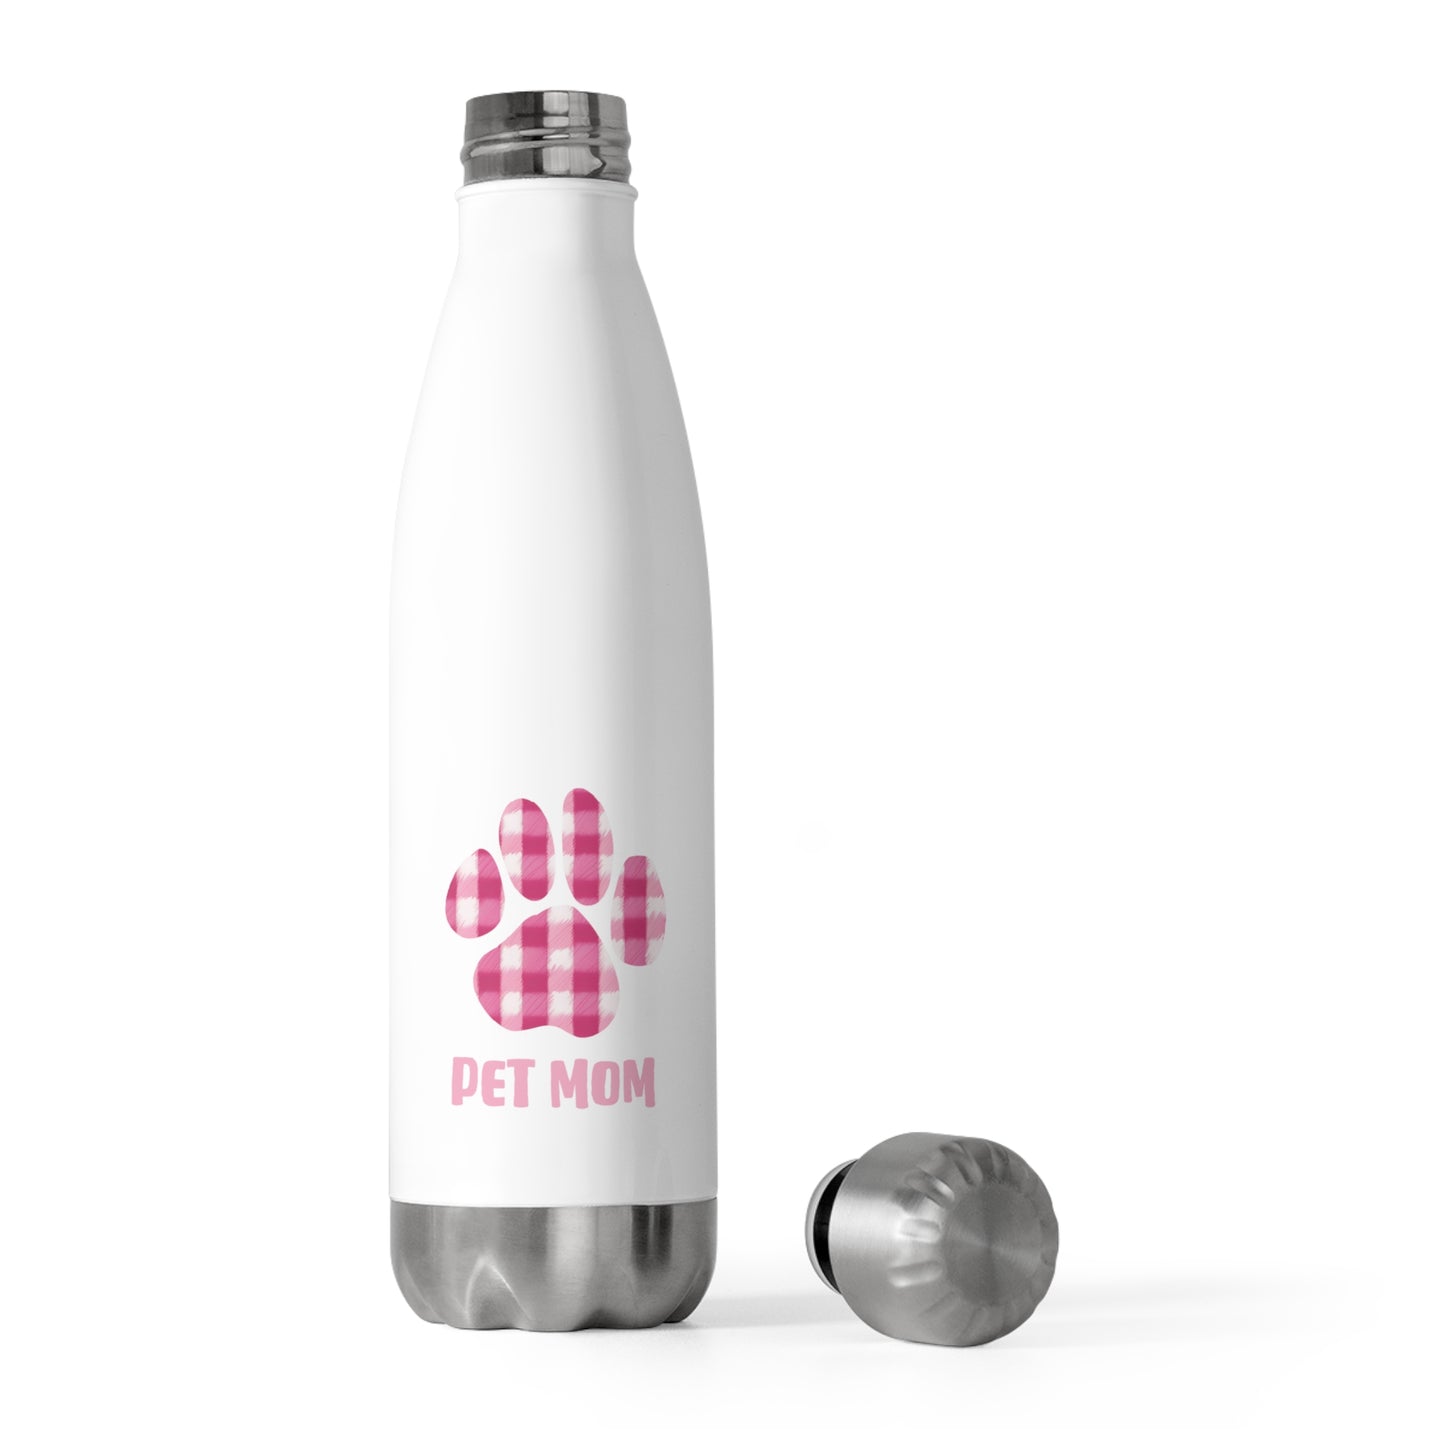 Paw Print Pet Mom Insulated Stainless Steel Bottle - 20oz